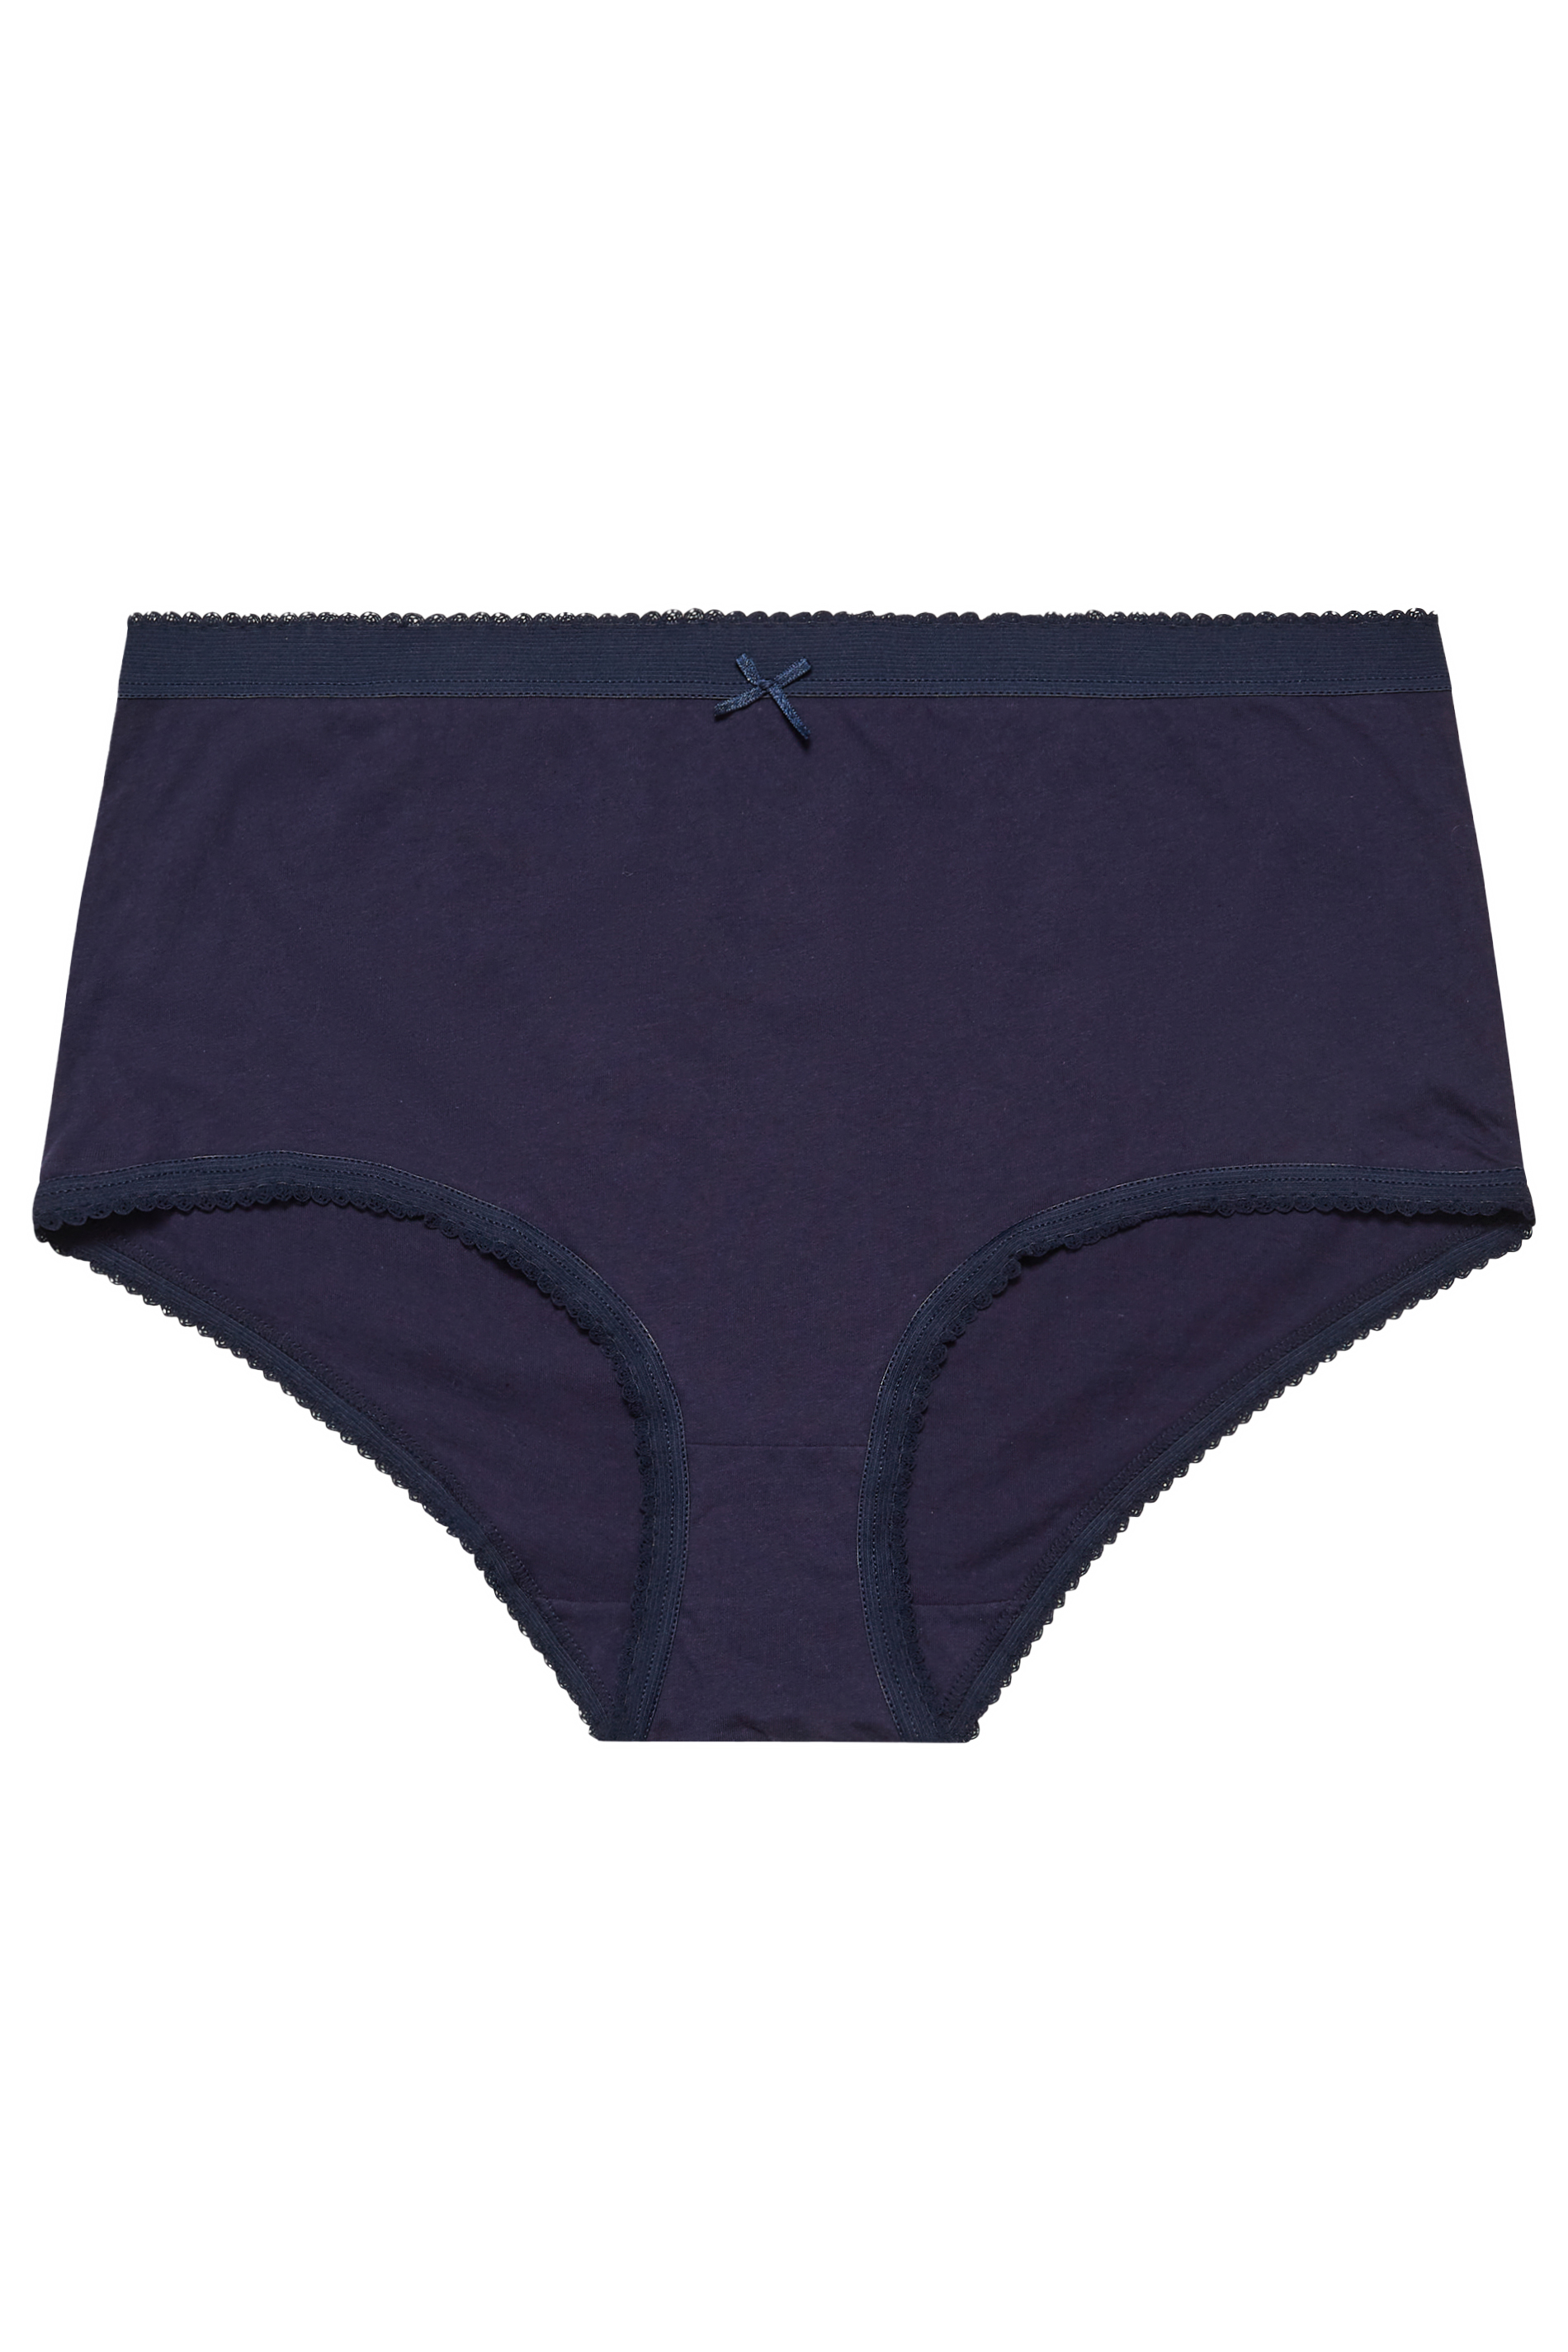 Buy Yours Curve Full Briefs 5 Pack from the Laura Ashley online shop